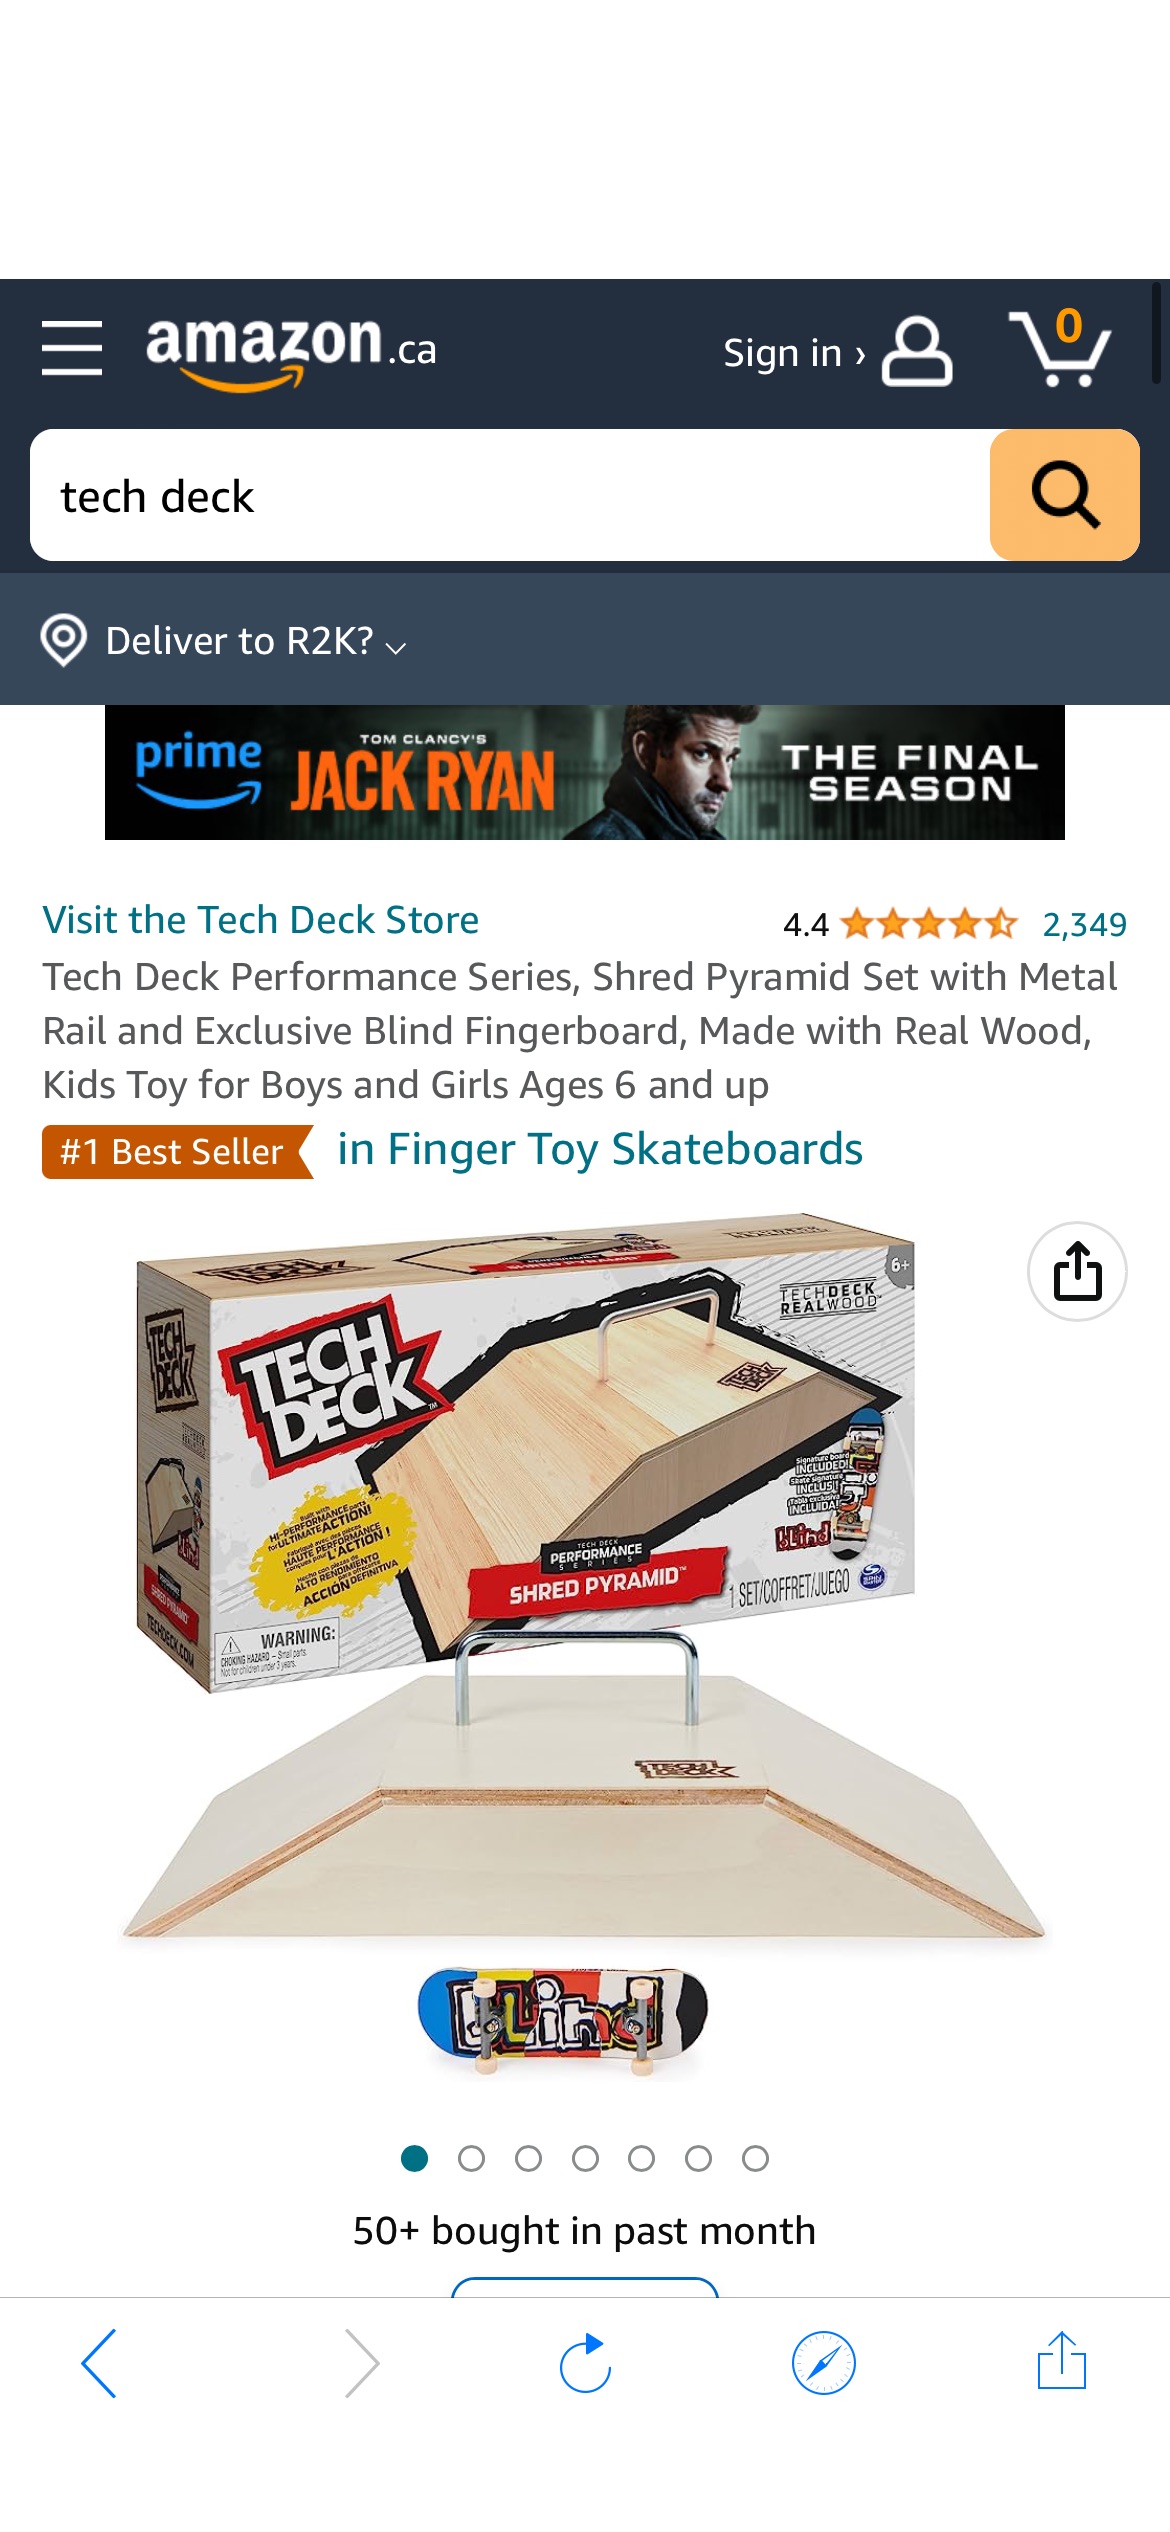 Tech Deck Performance Series, Shred Pyramid Set with Metal Rail and Exclusive Blind Fingerboard, Made with Real Wood, Kids Toy for Boys and Girls Ages 6 and up : Amazon.ca: Toys & Games